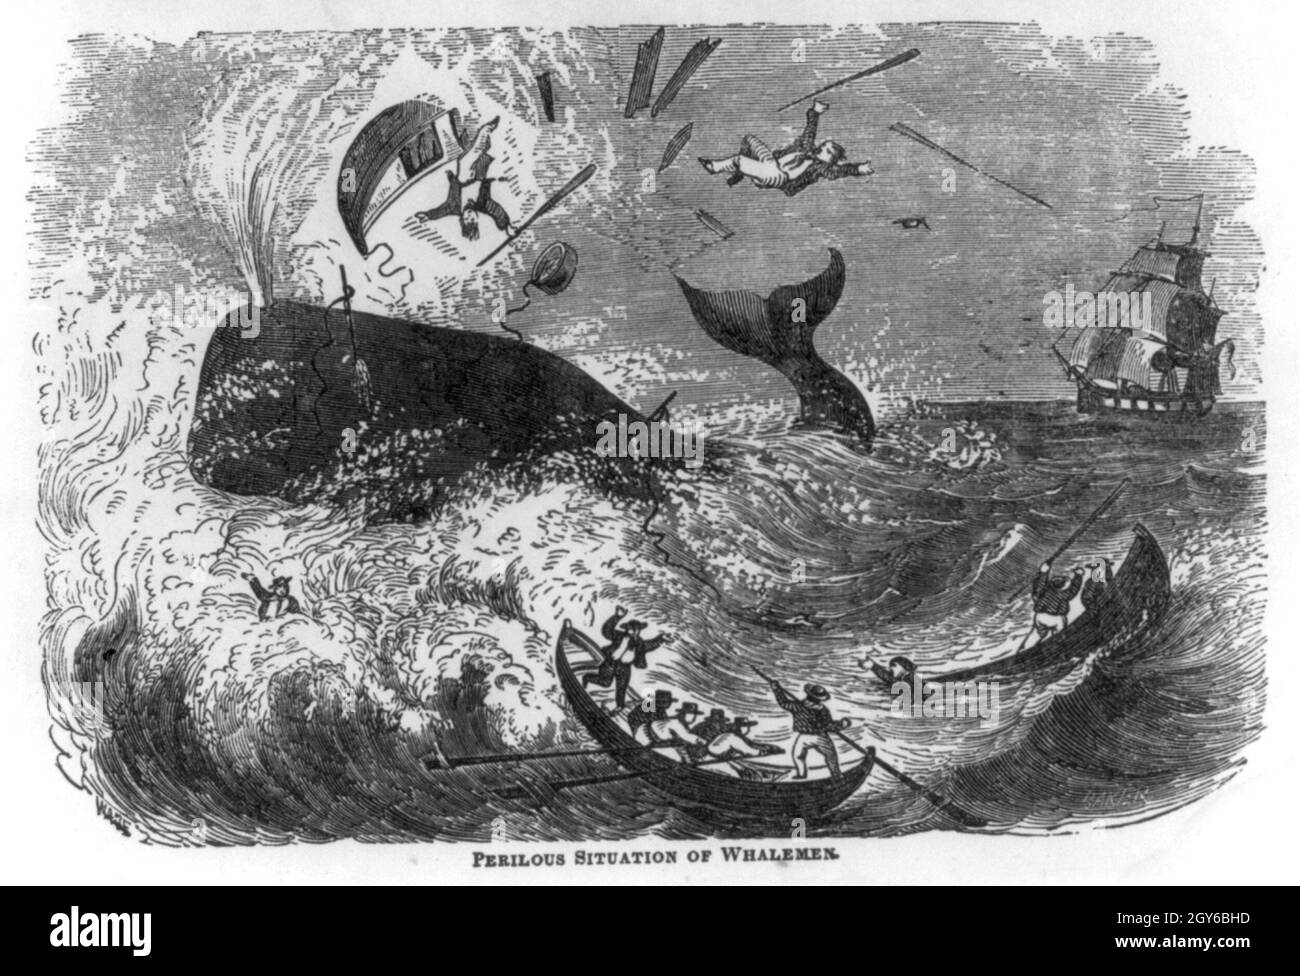 Vintage woodcut illustration circa 1861 entitled Perilous situation of whalemen showing a whaling boat being smashed by a harpooned sperm whale Stock Photo